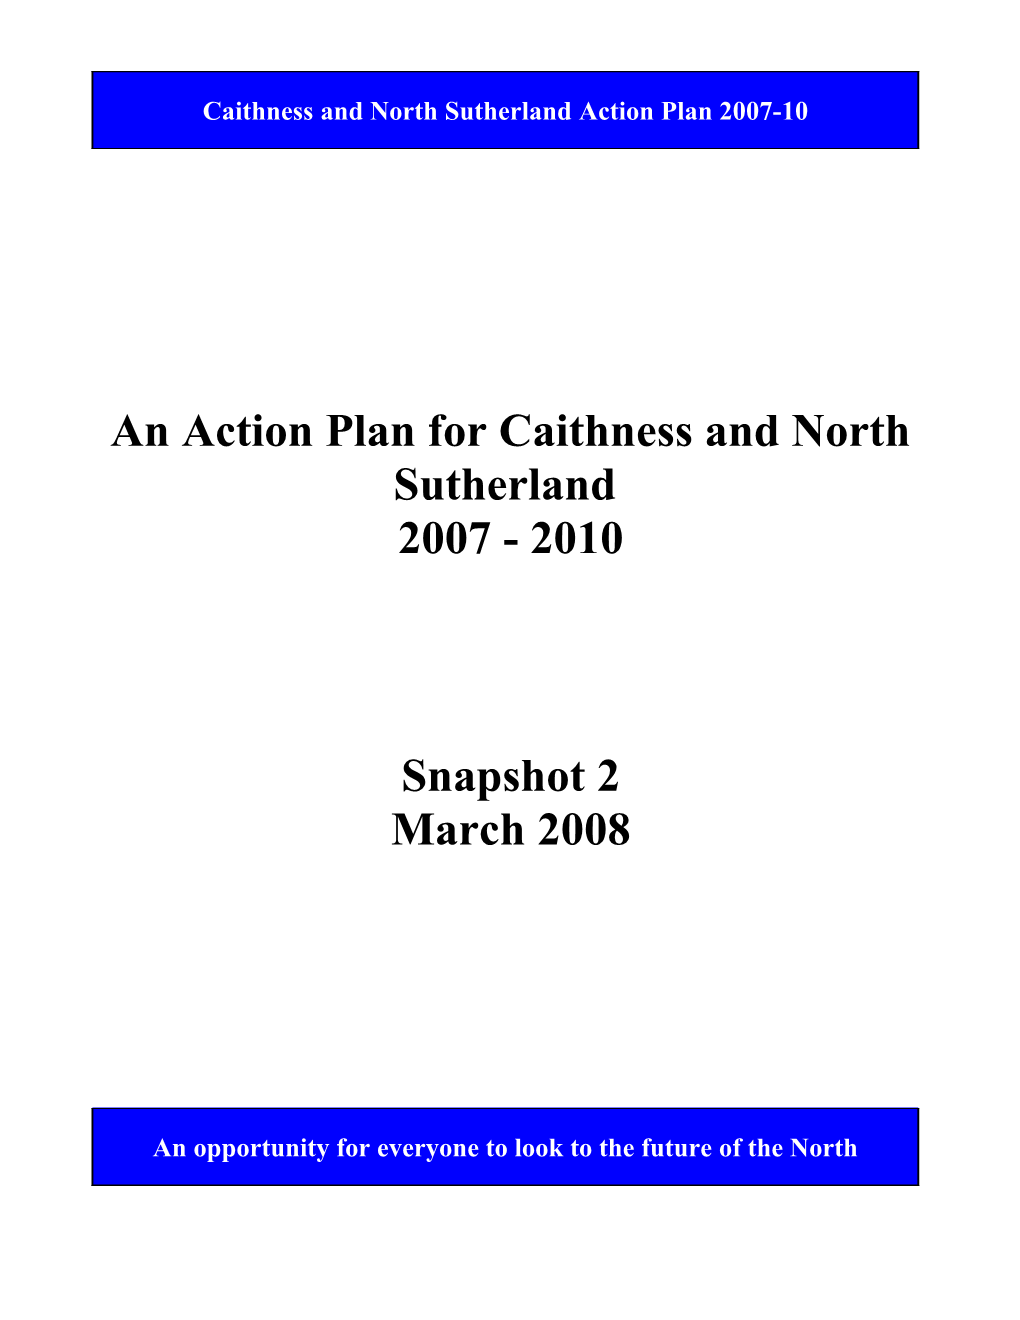 An Action Plan for Caithness and North Sutherland